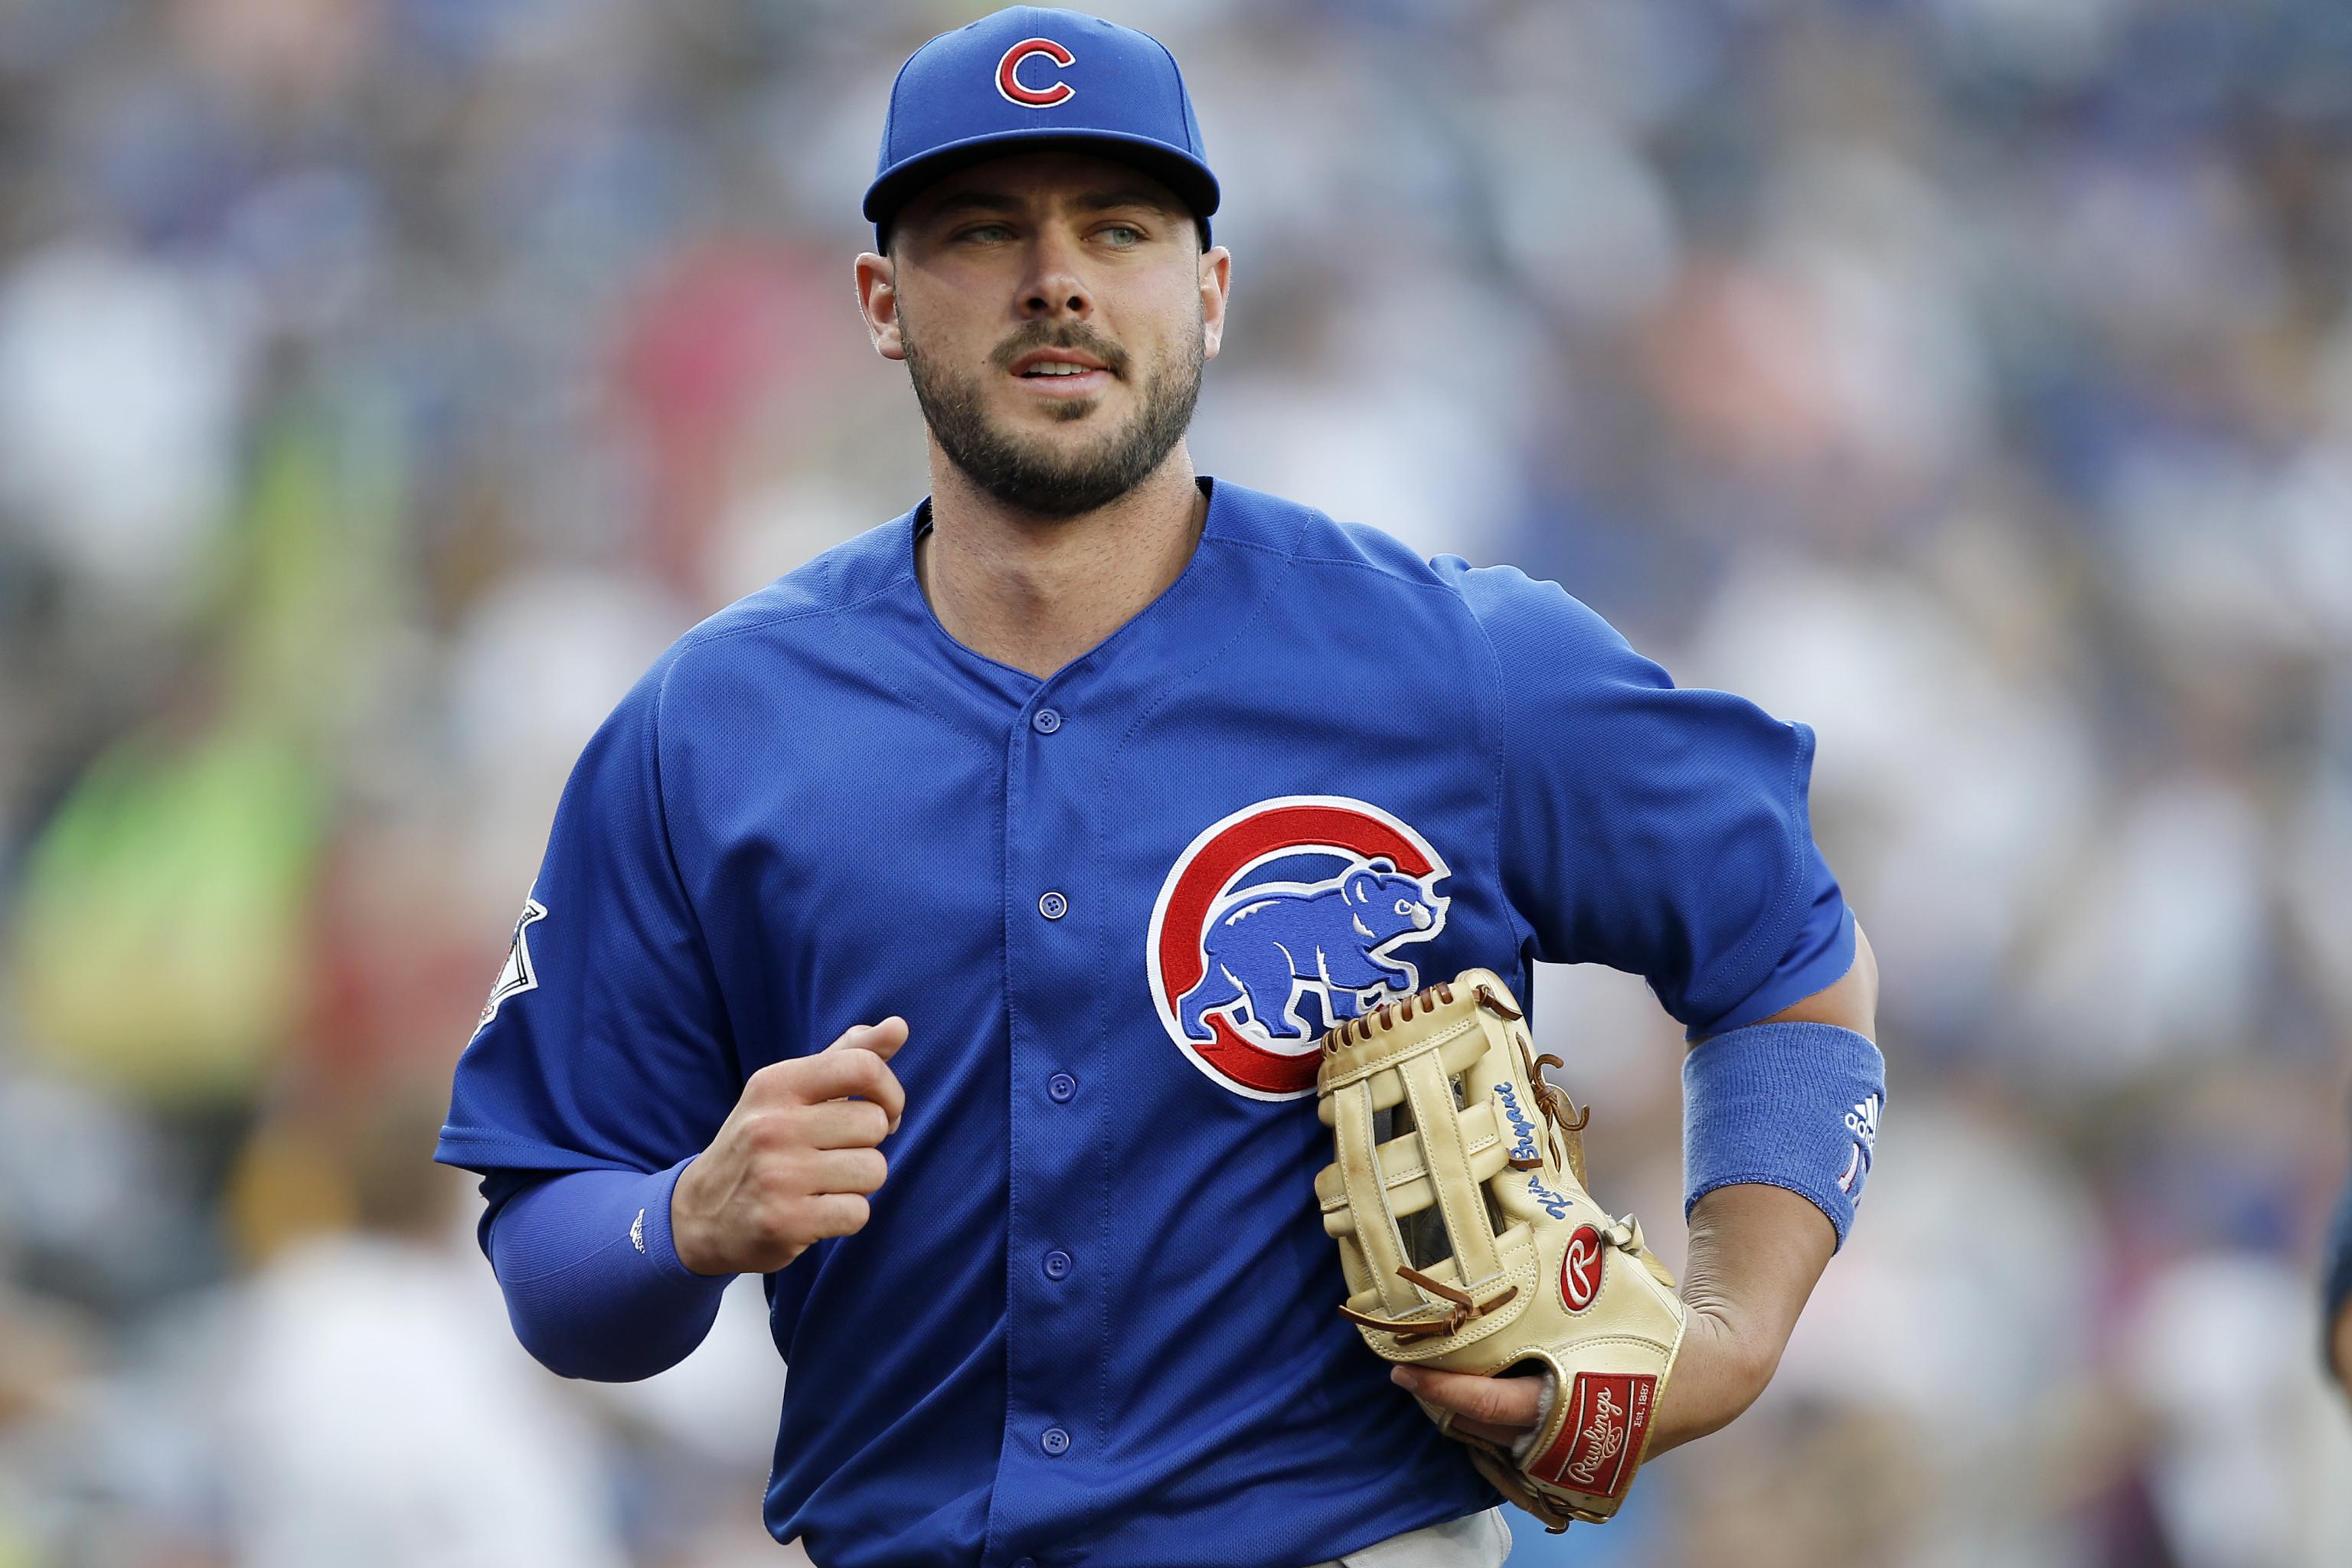 Kris Bryant of Chicago Cubs has top-selling MLB jersey - ESPN